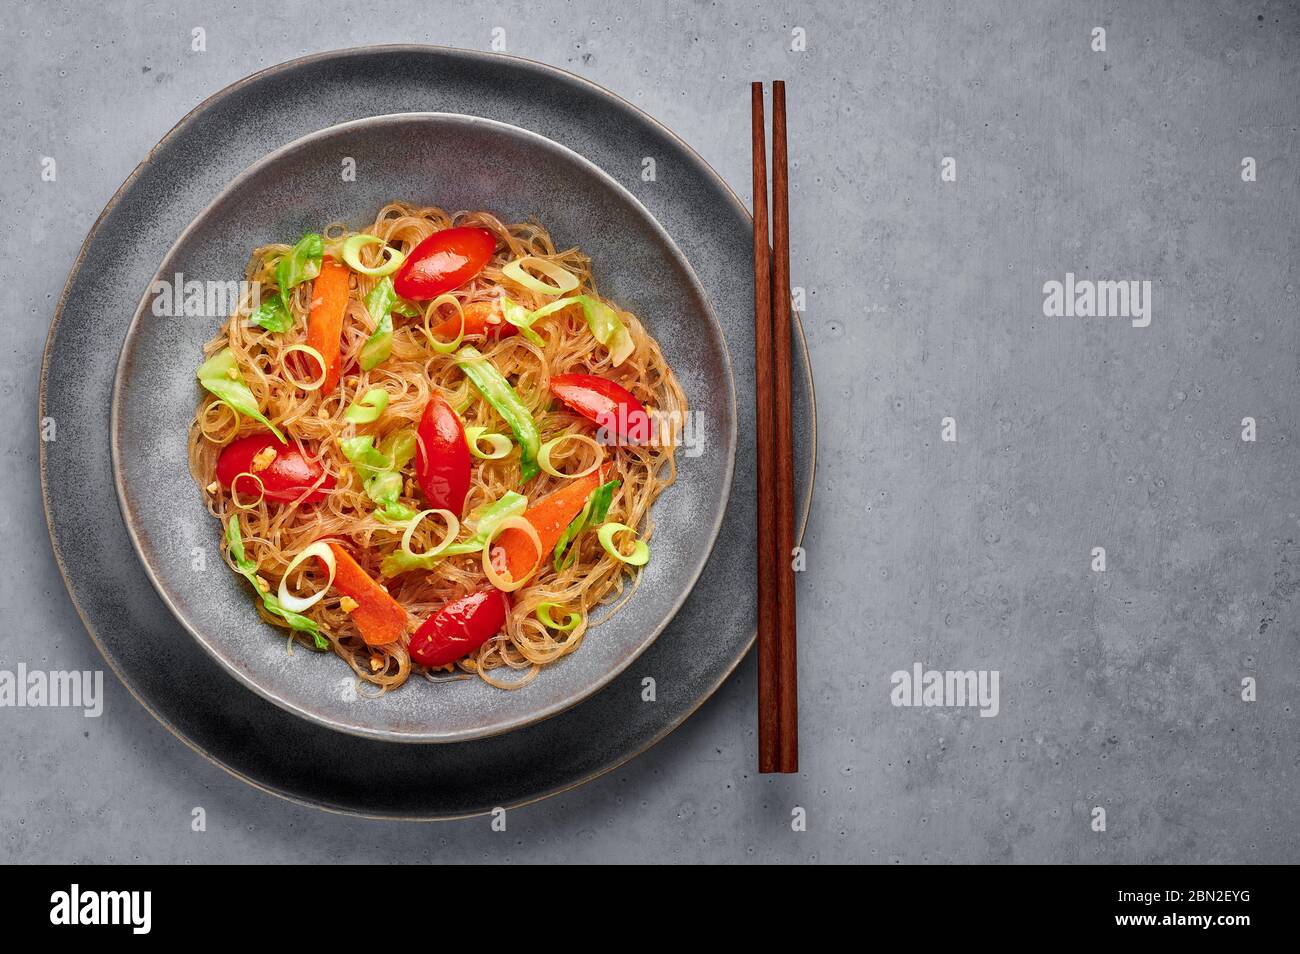 Veg Pad Woon Sen or Thai Glass Noodle Stir-Fry or Pad Thai in bowl on gray concrete backdrop. Vegetarian Pad Woon Sen is a Thai dish of glass bean noo Stock Photo